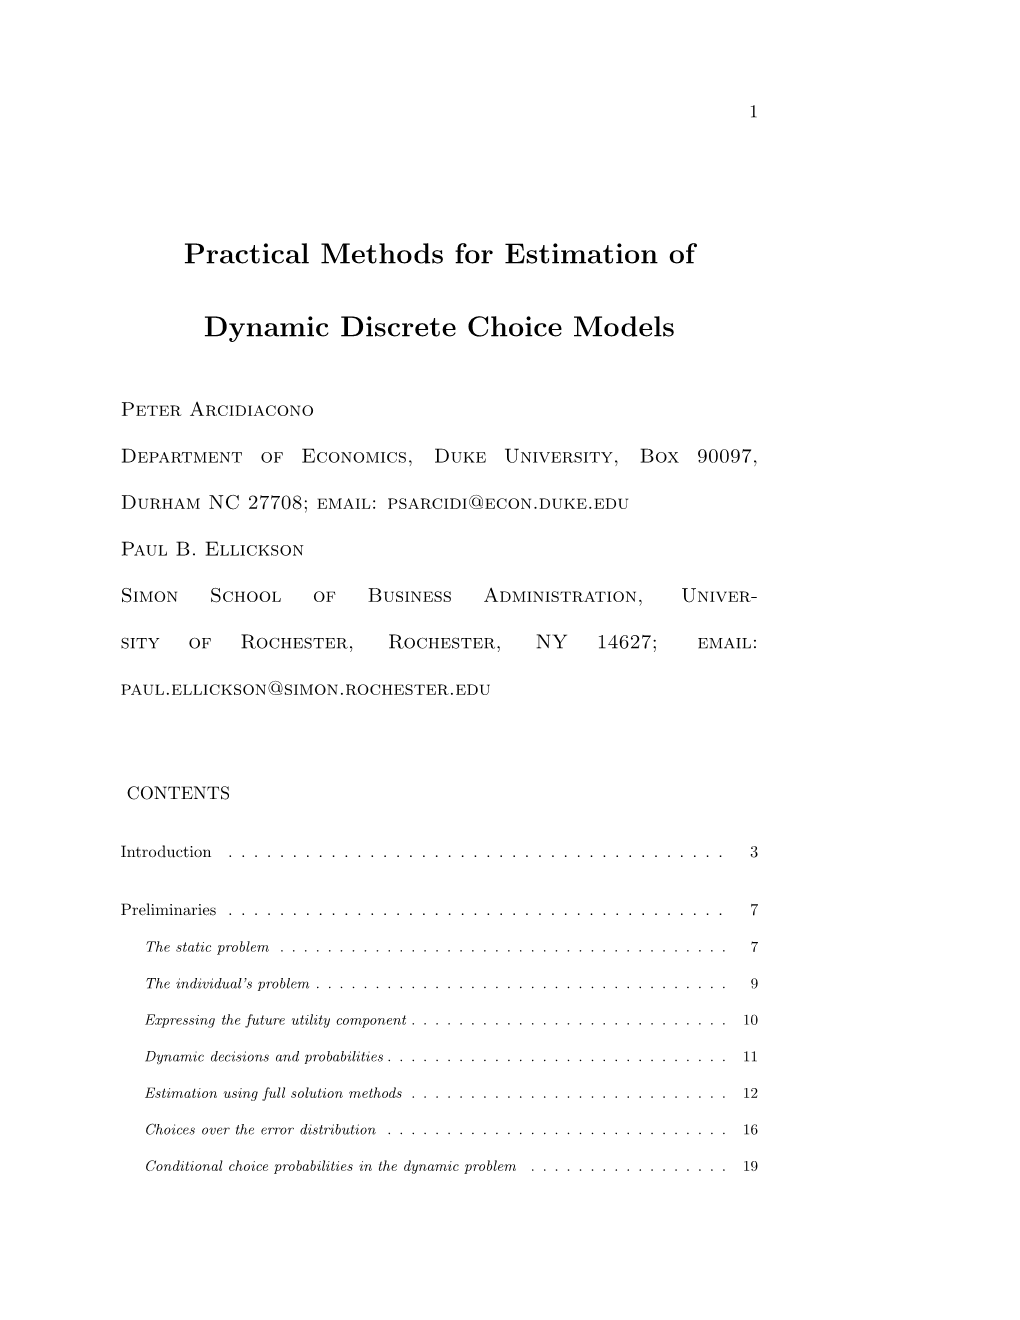 Practical Methods for Estimation of Dynamic Discrete Choice Models